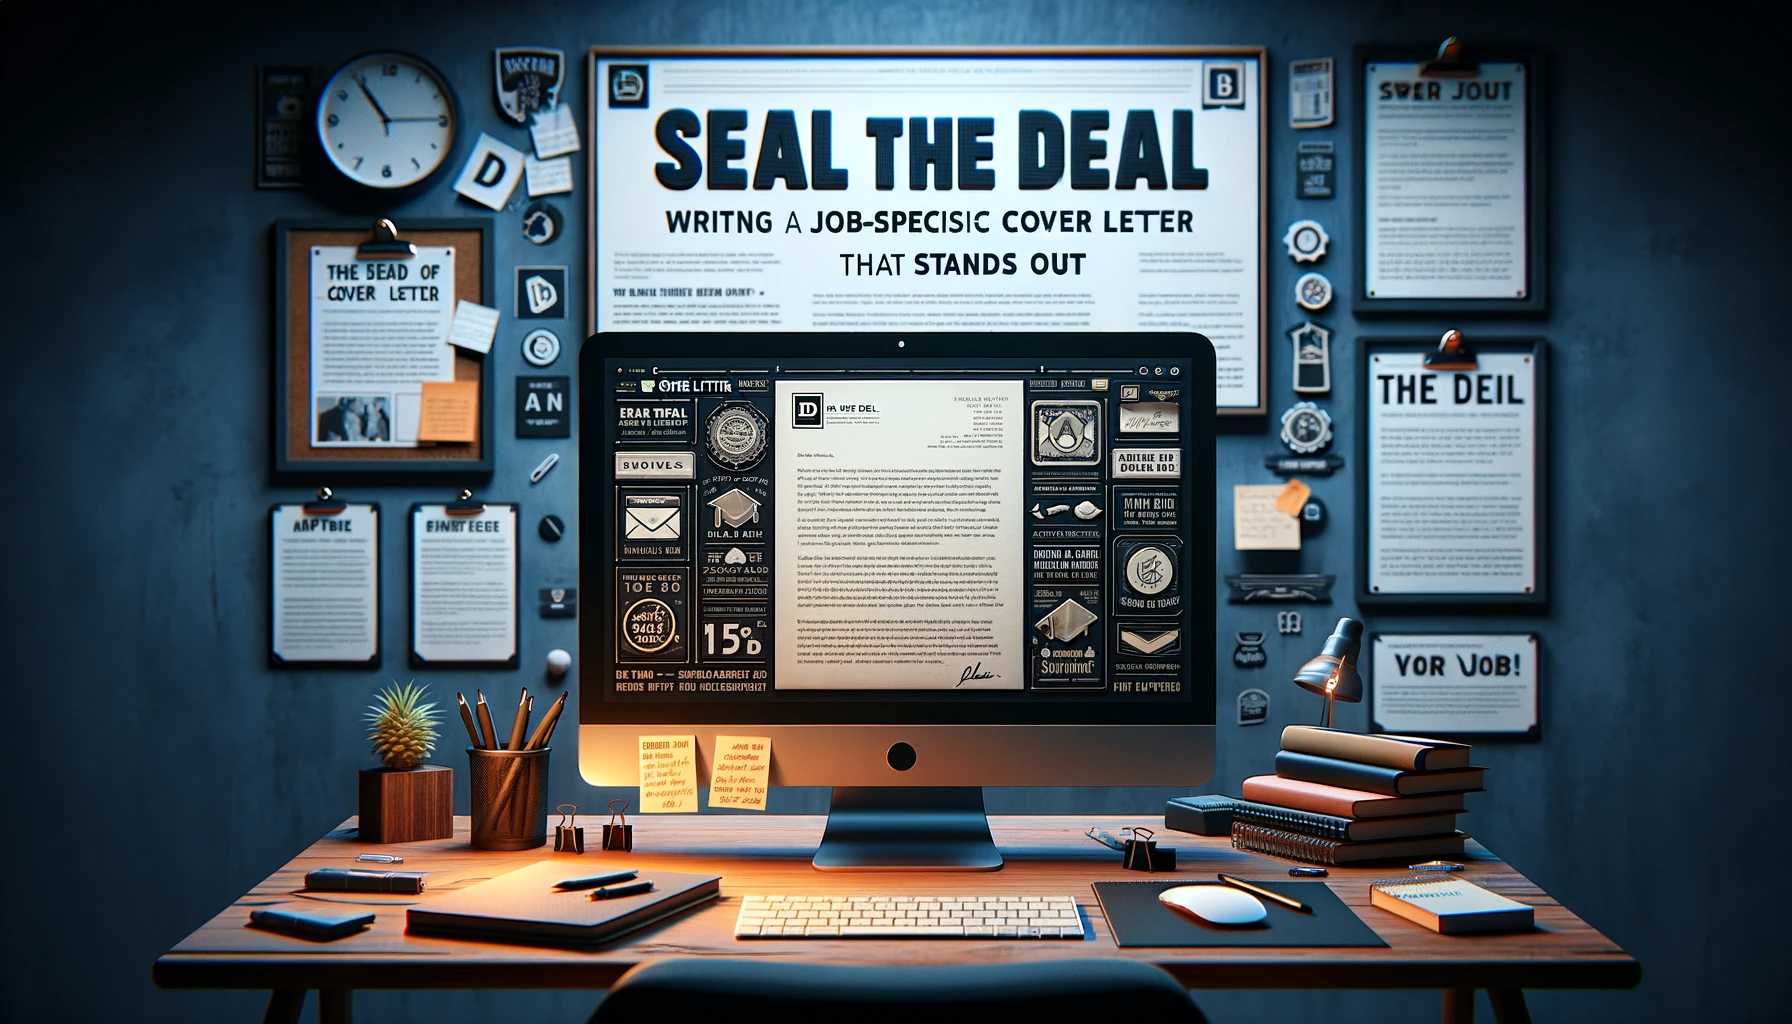 Seal the Deal: Writing a Job-Specific Cover Letter That Stands Out